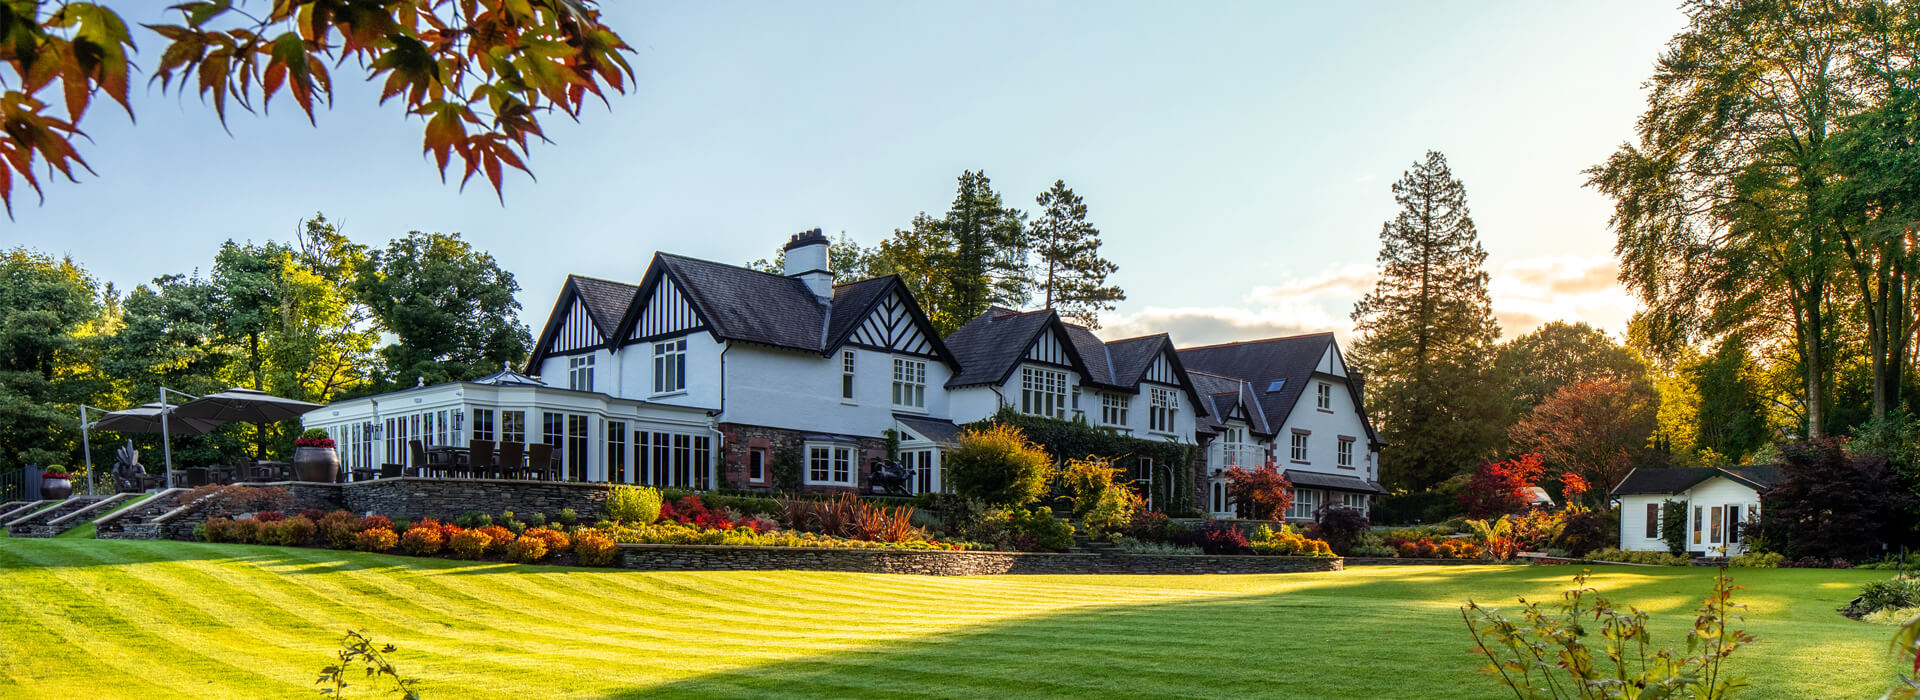 Leeu Collection | United Kingdom | OFFERS & EXPERIENCES Walking Windermere